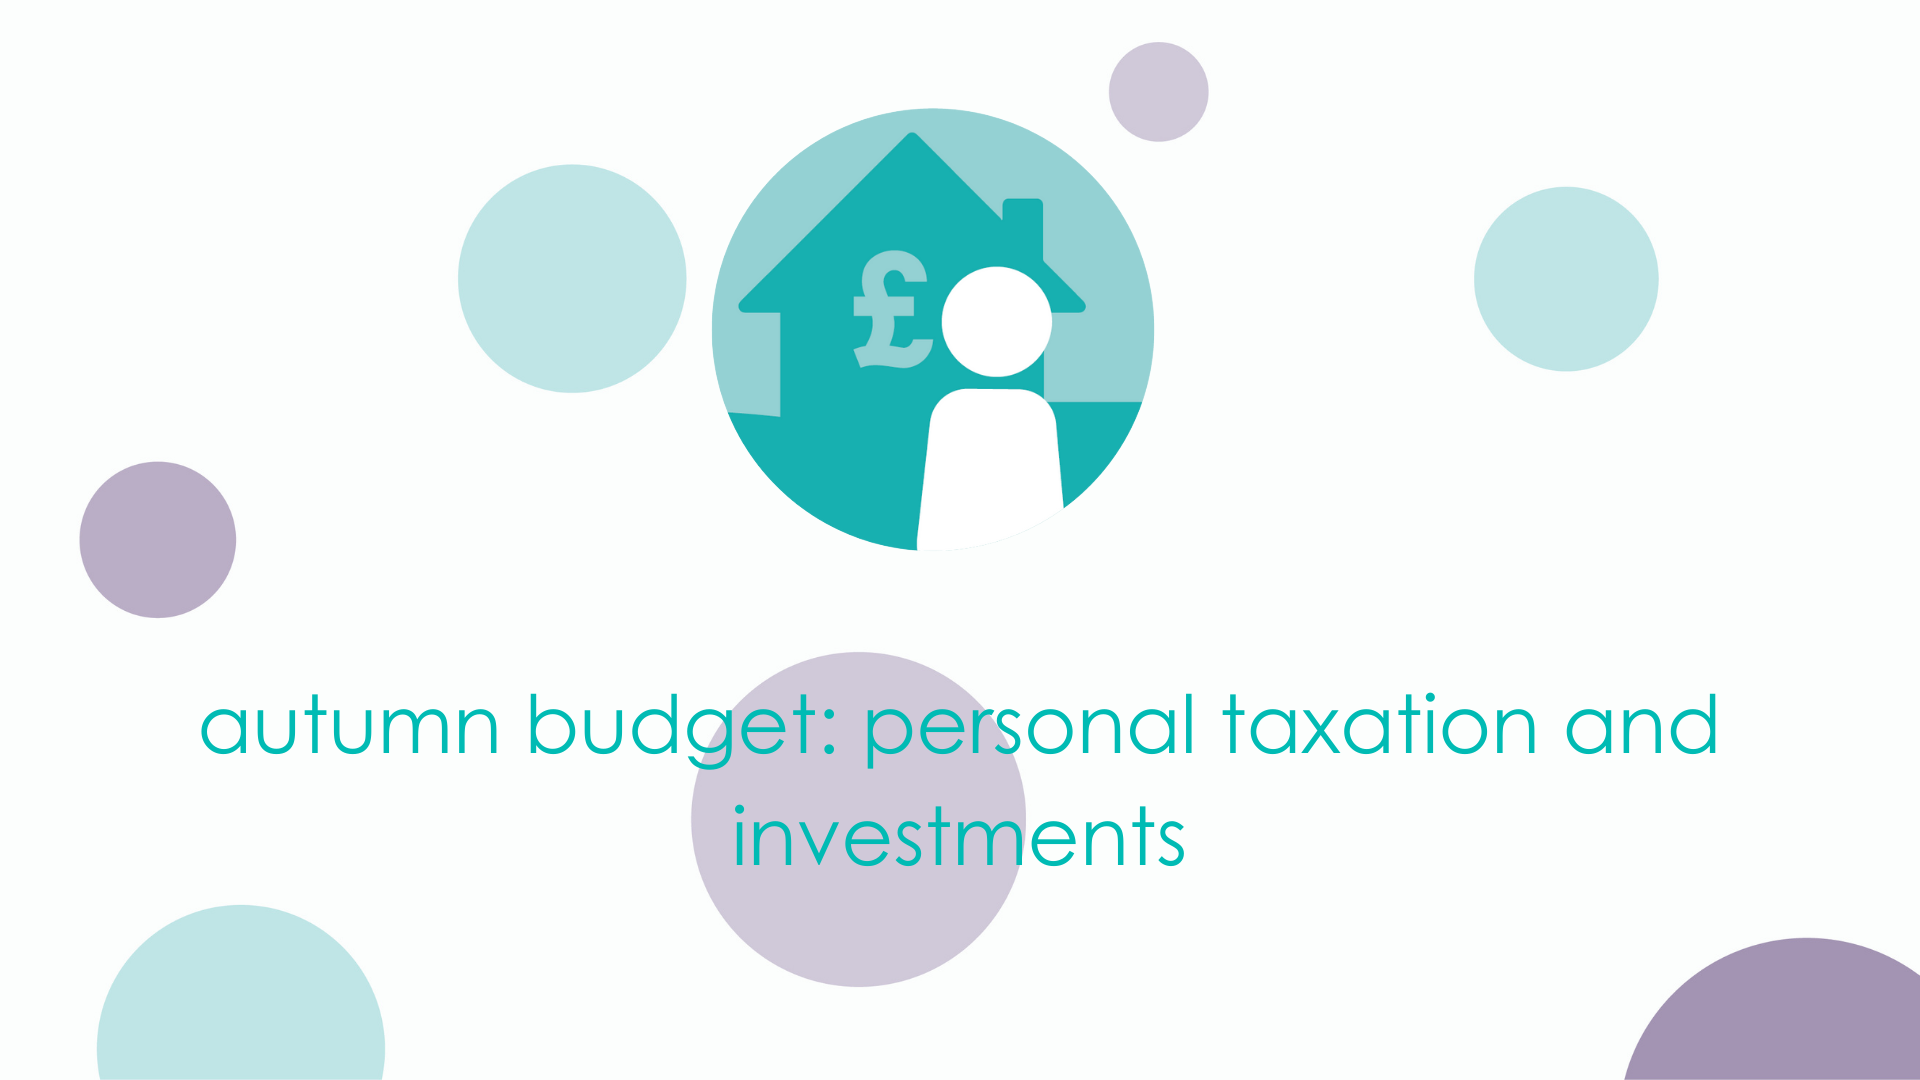 autumn budget: personal taxation and investments